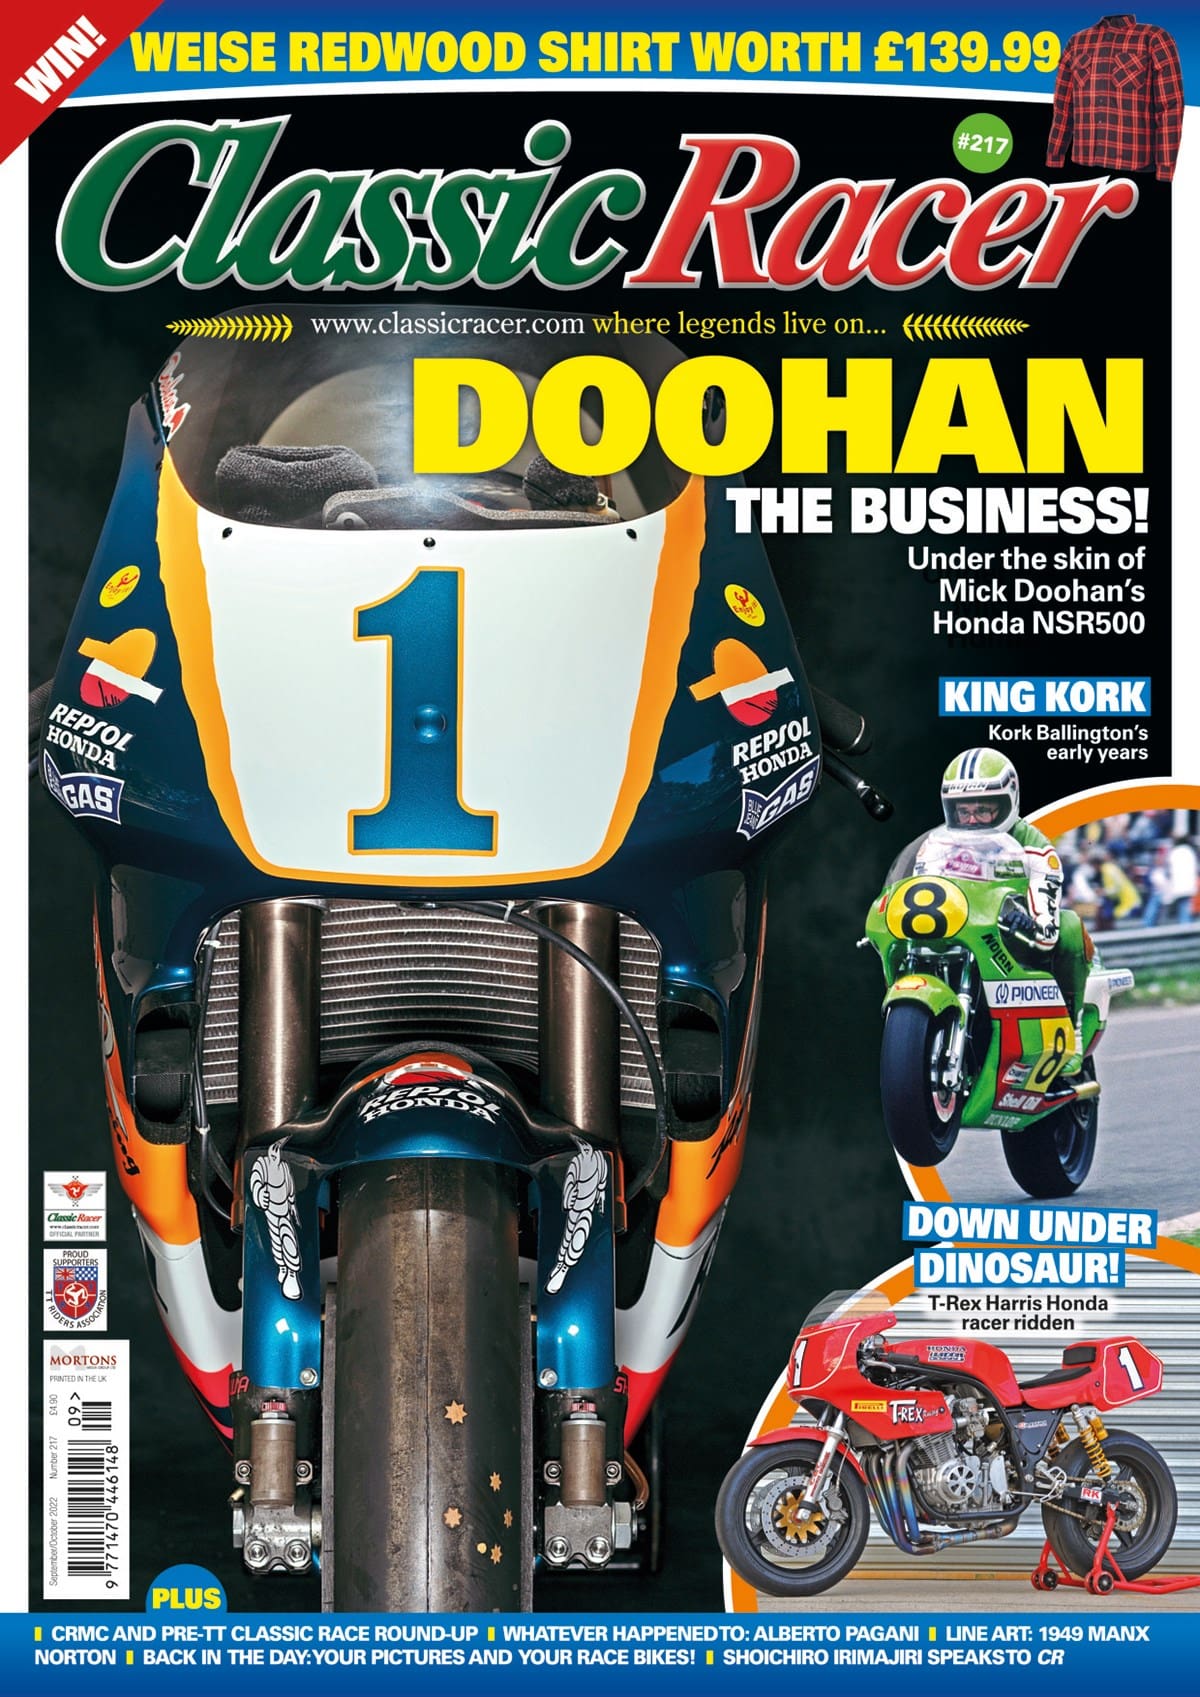 PREVIEW SEPTEMBER/OCTOBER ISSUE OF CLASSIC RACER MAGAZINE